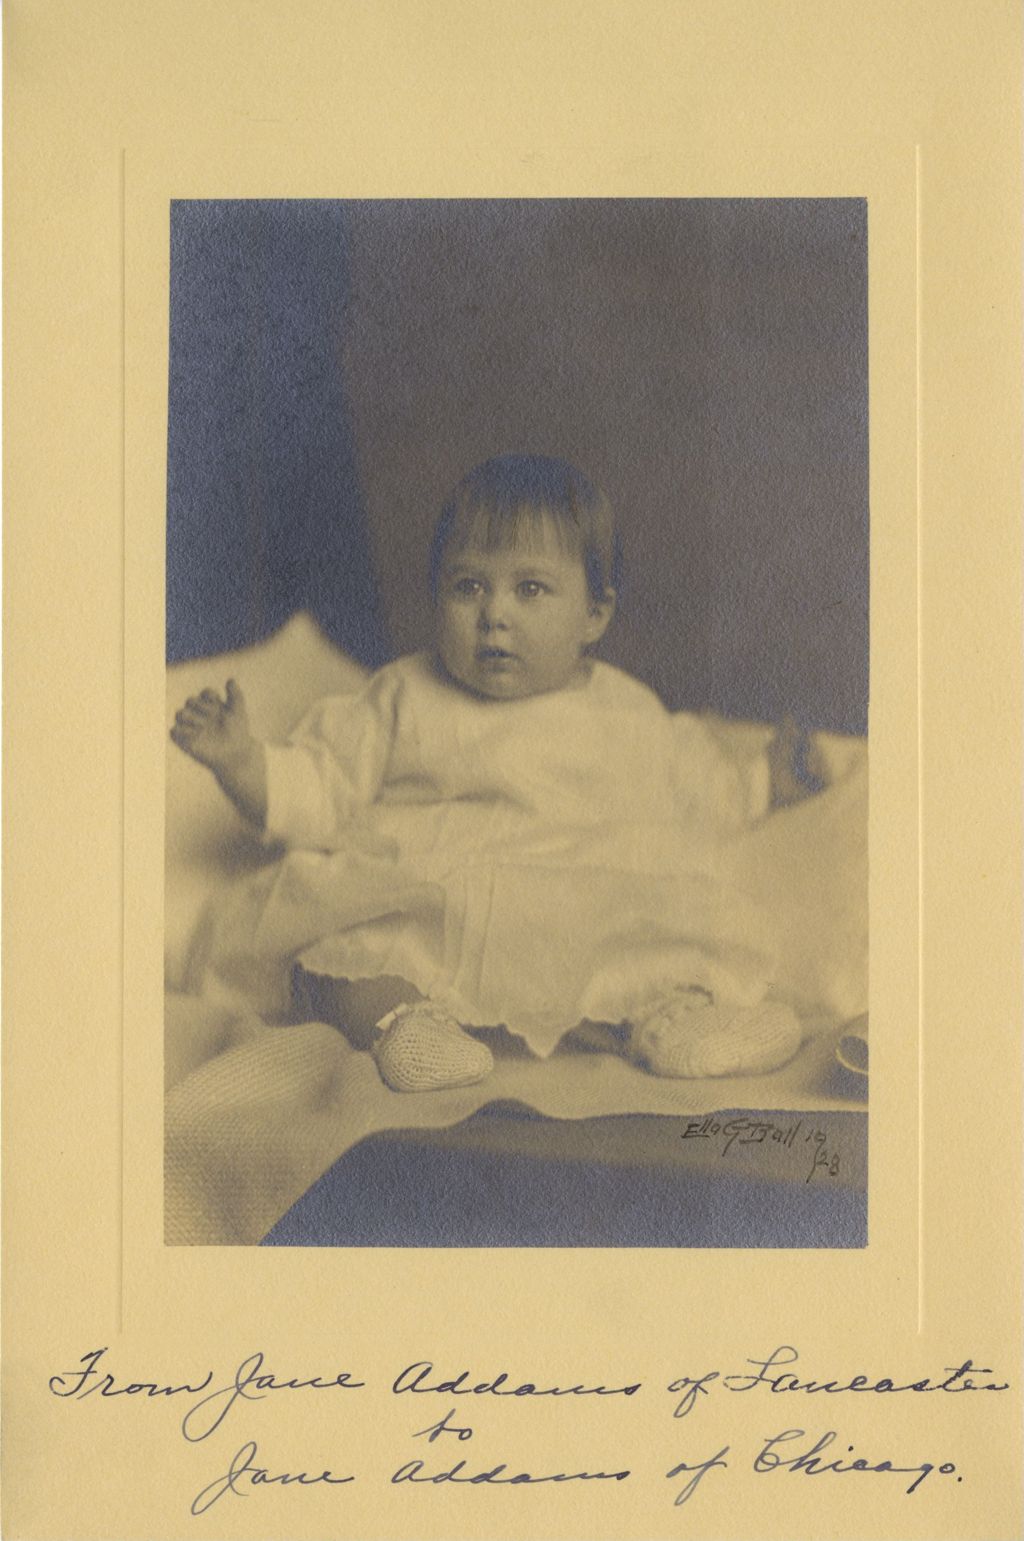 Miniature of Photographic portrait of baby girl named after Jane Addams